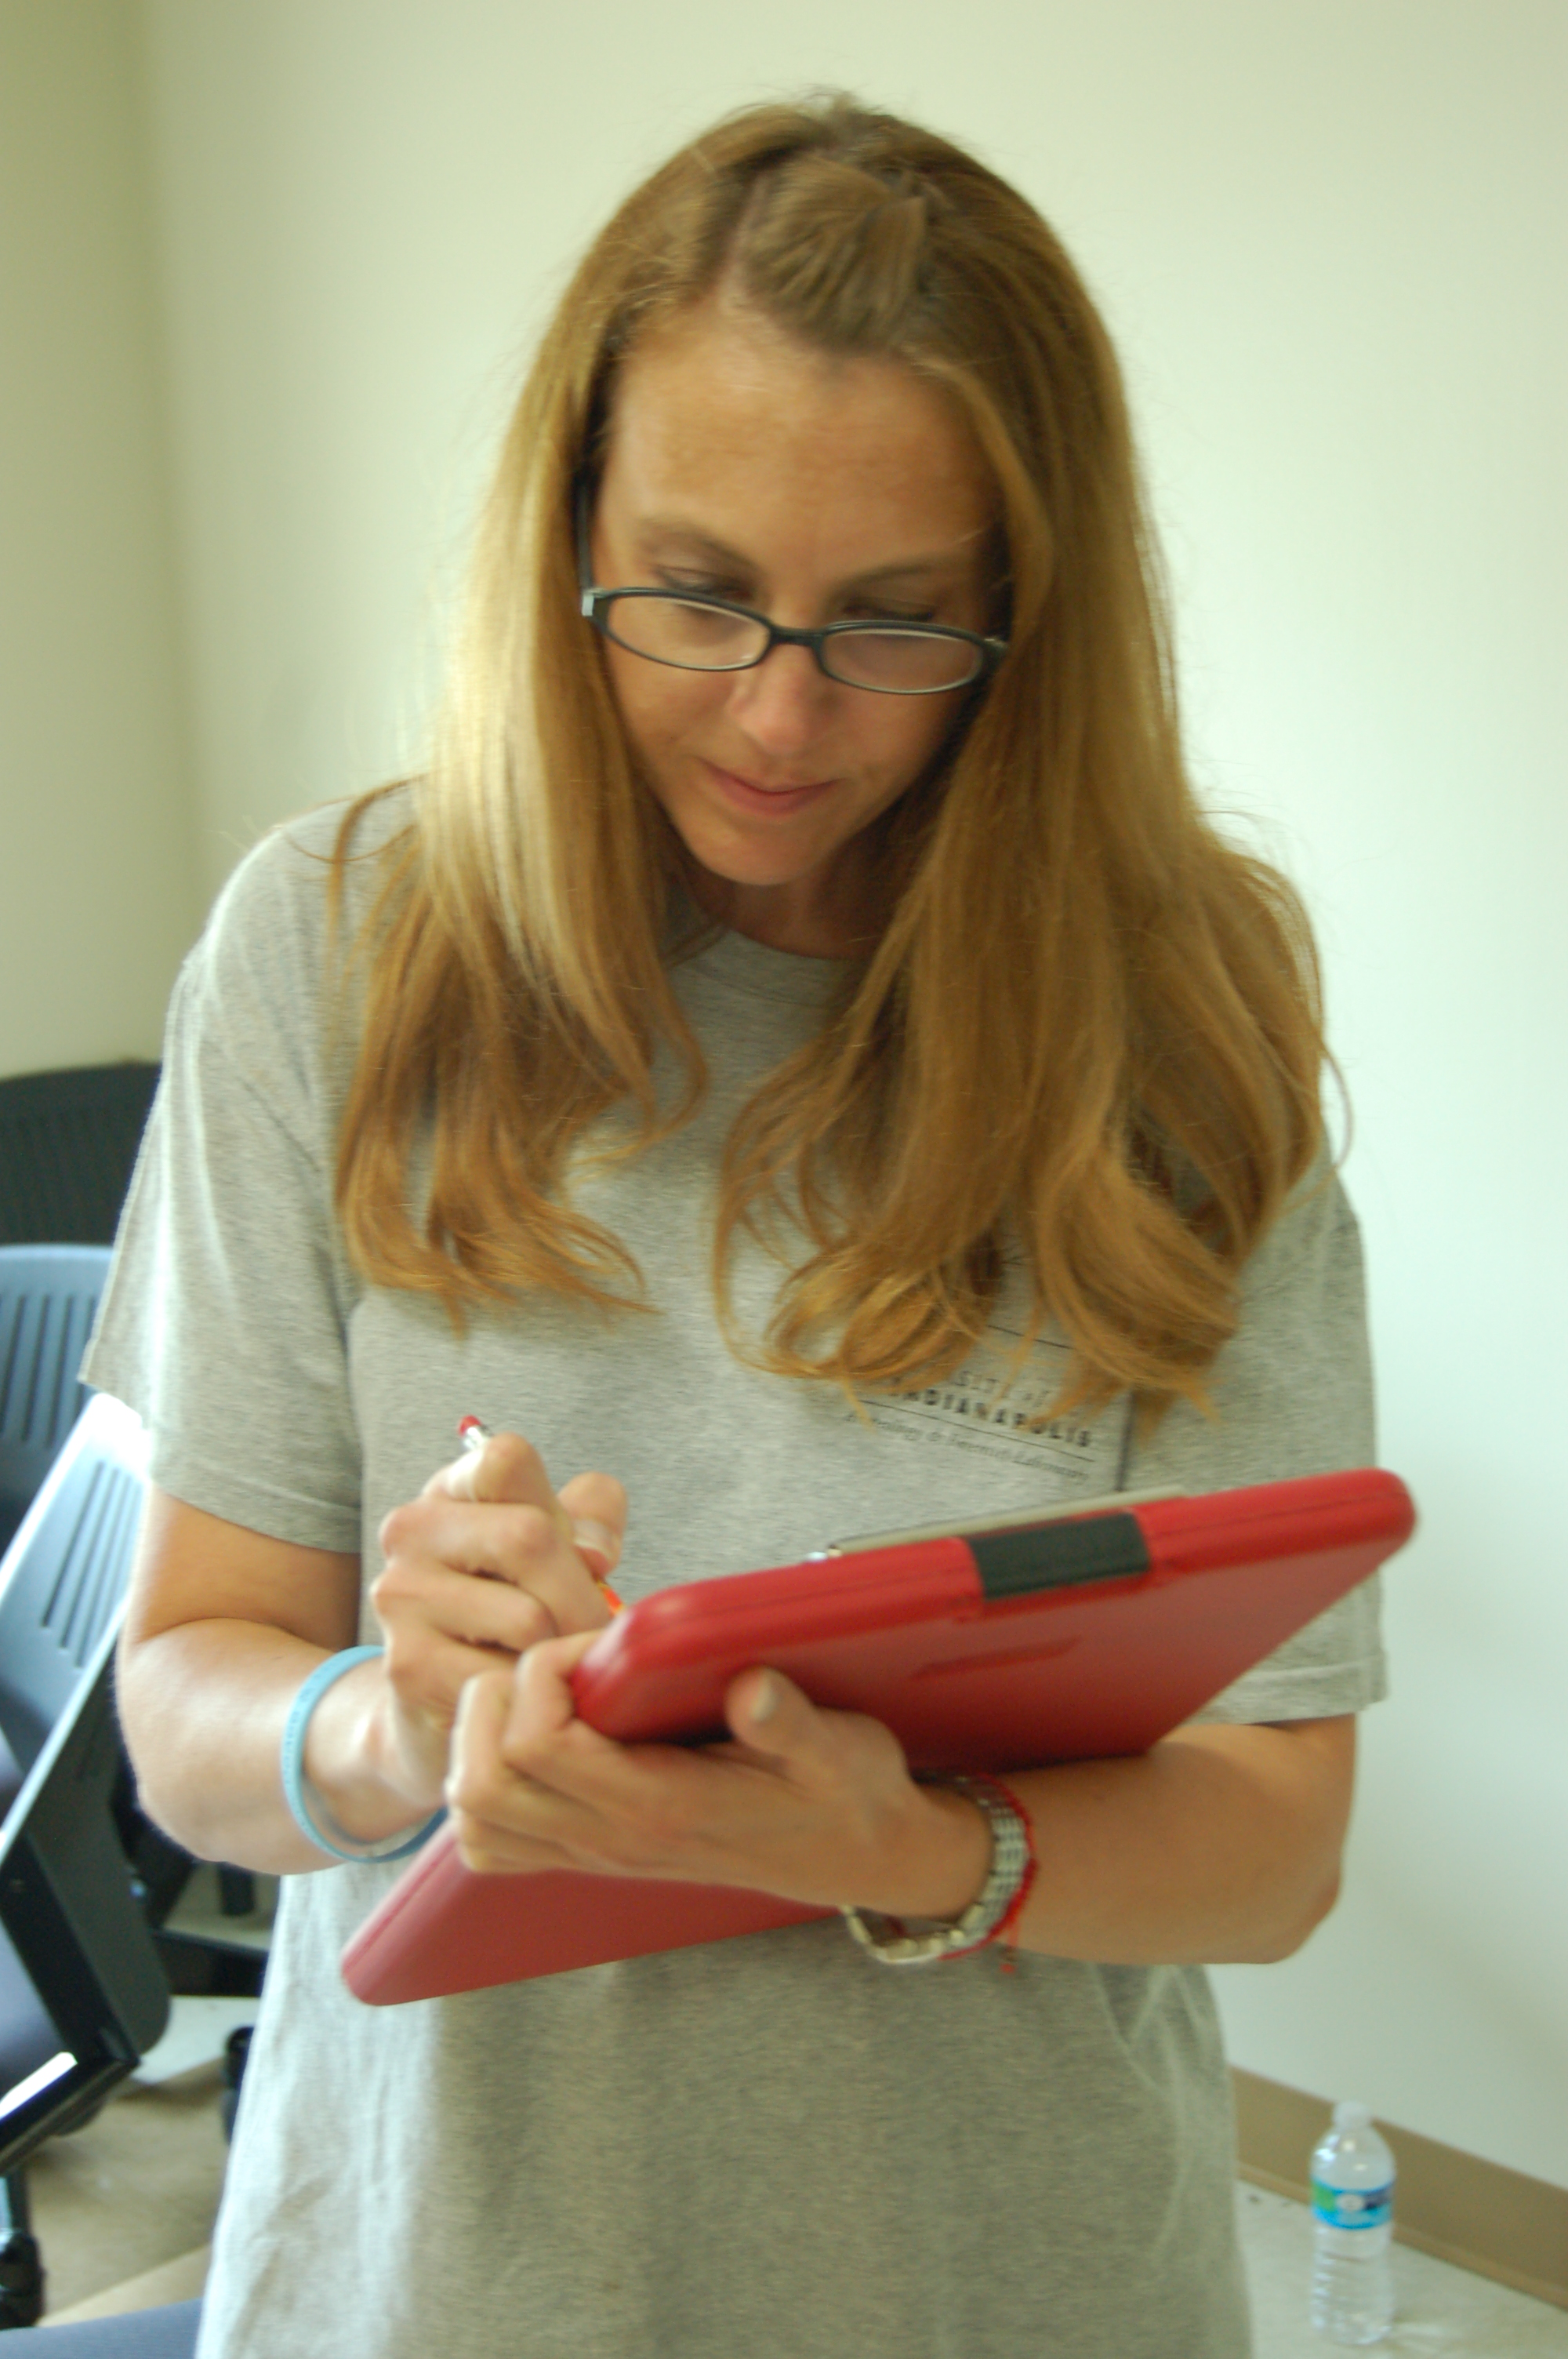 Dr. Krista Latham writing notes on a red clipboard